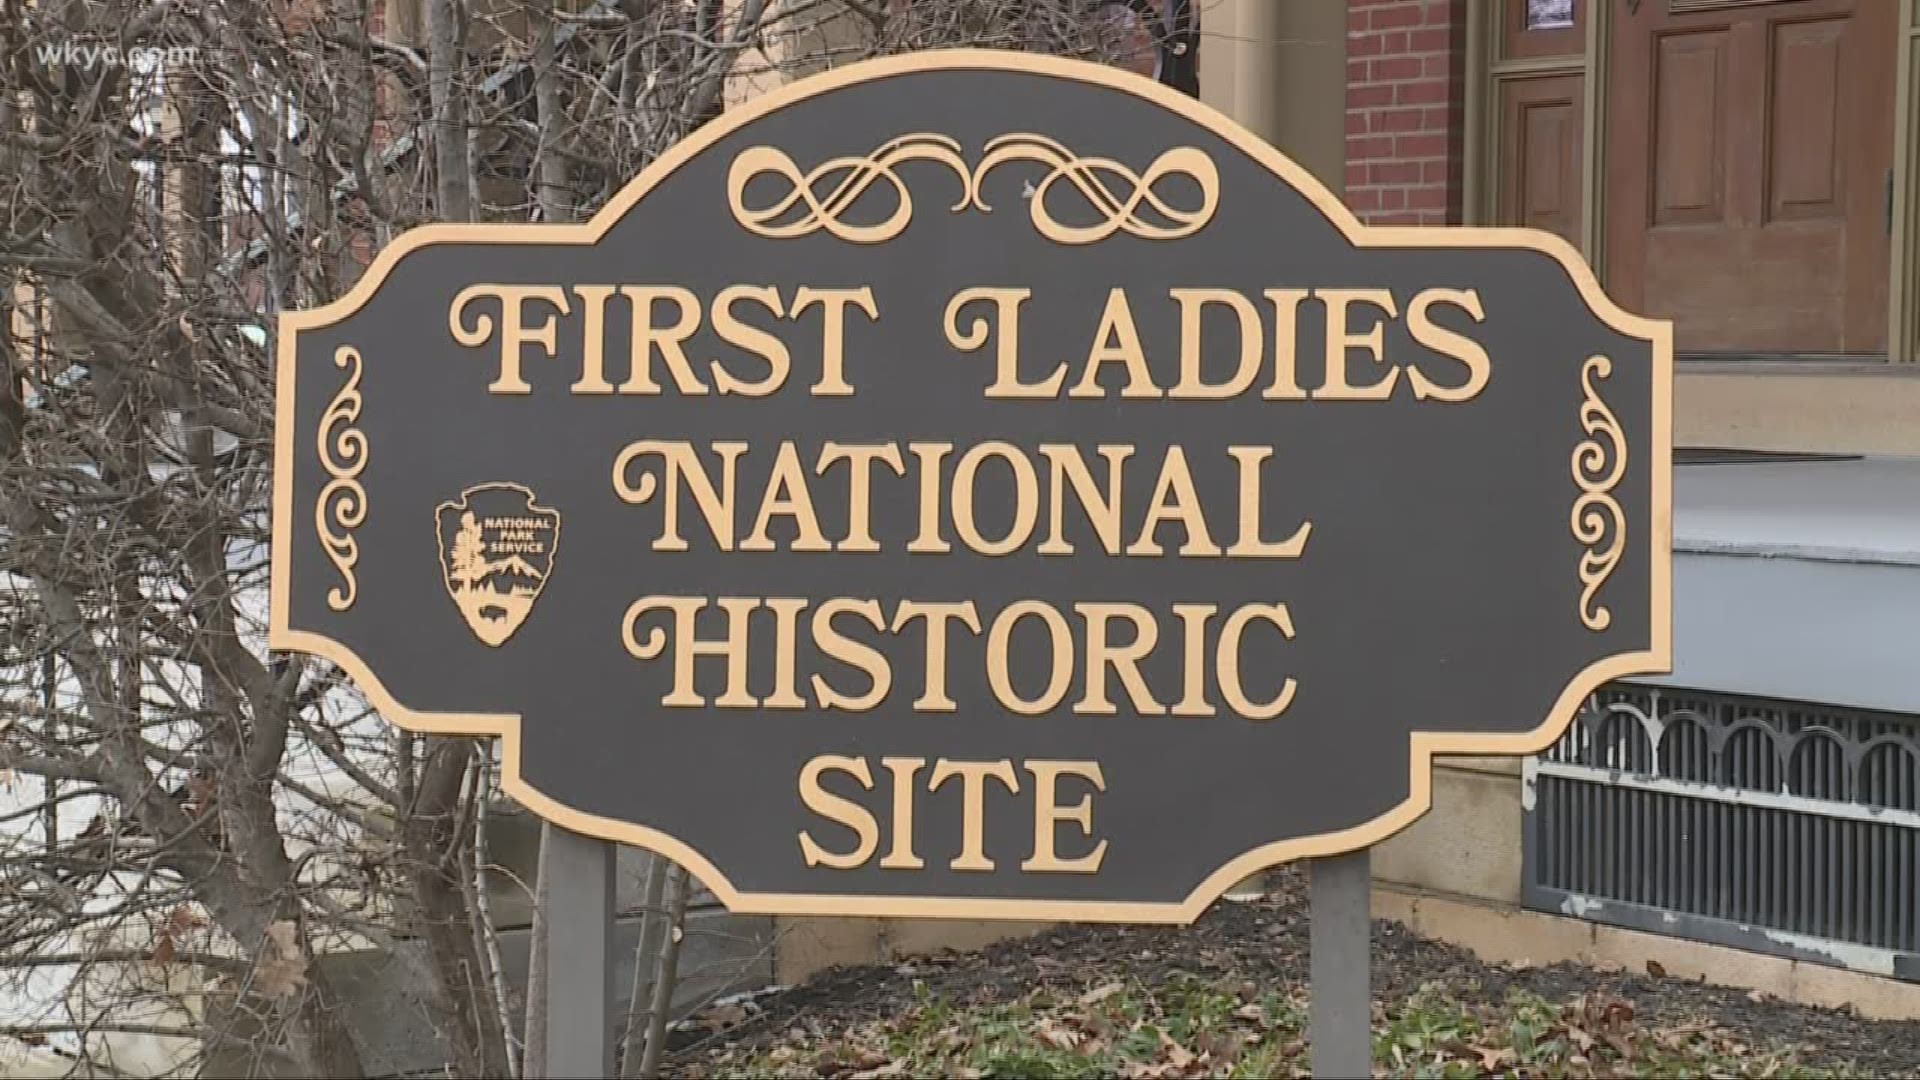 Inside Canton's First Ladies' Library and National Historic Site